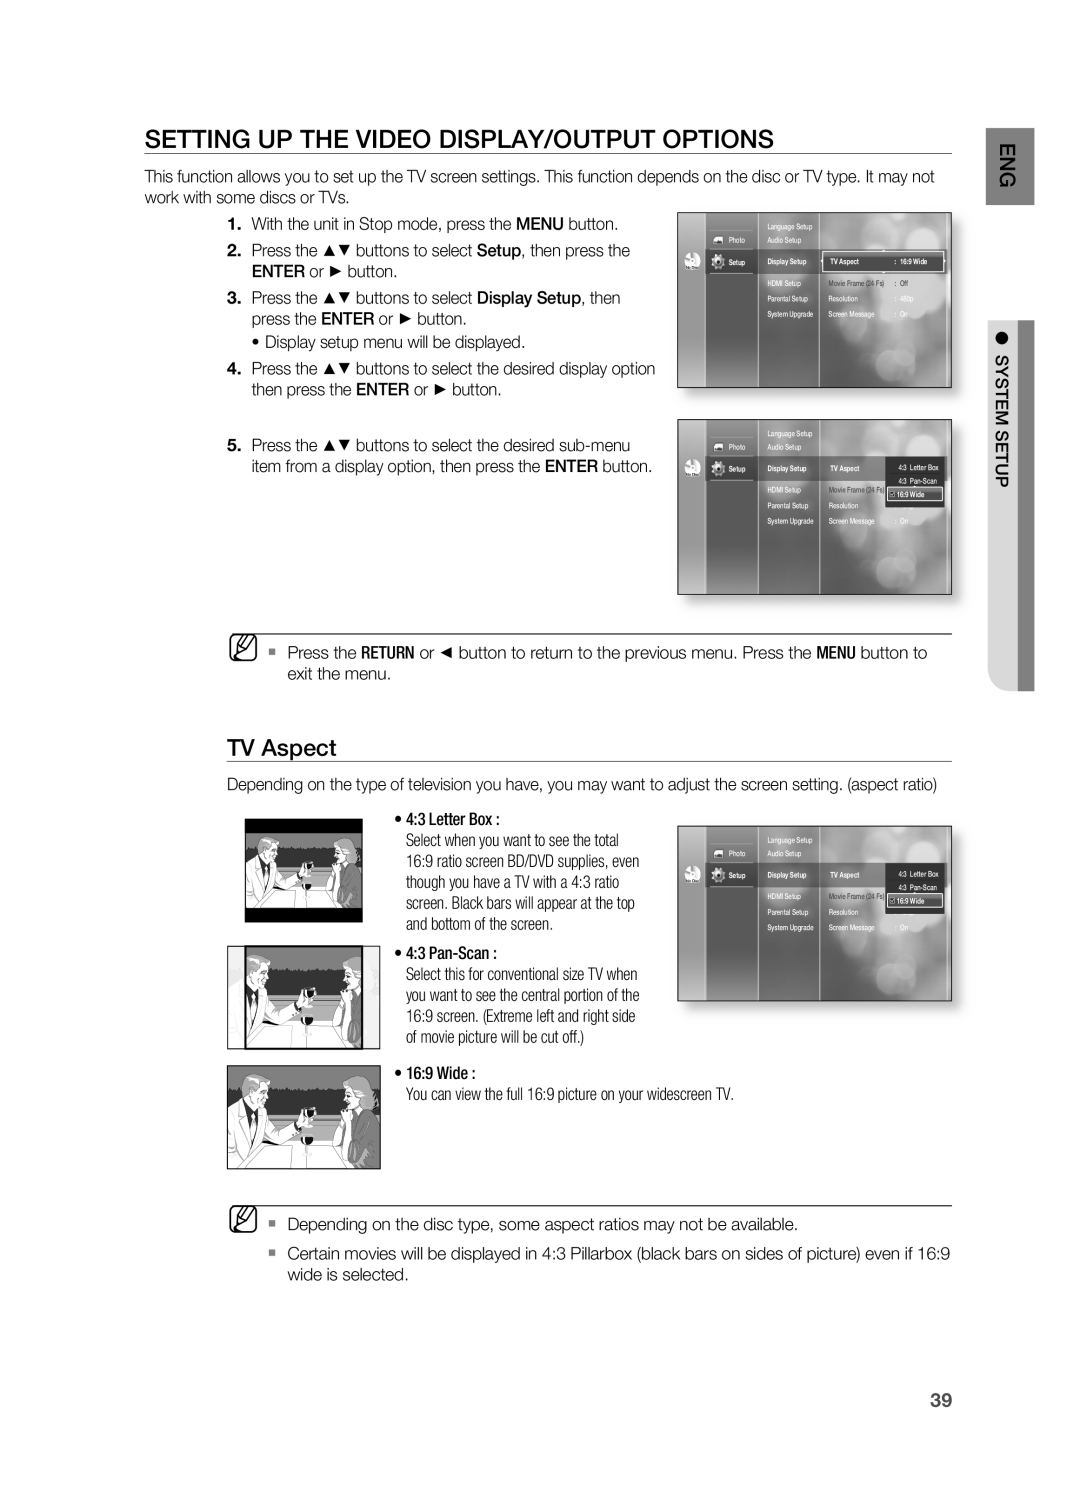 Samsung HT-BD2 manual Setting Up The Video Display/Output Options, TV Aspect 